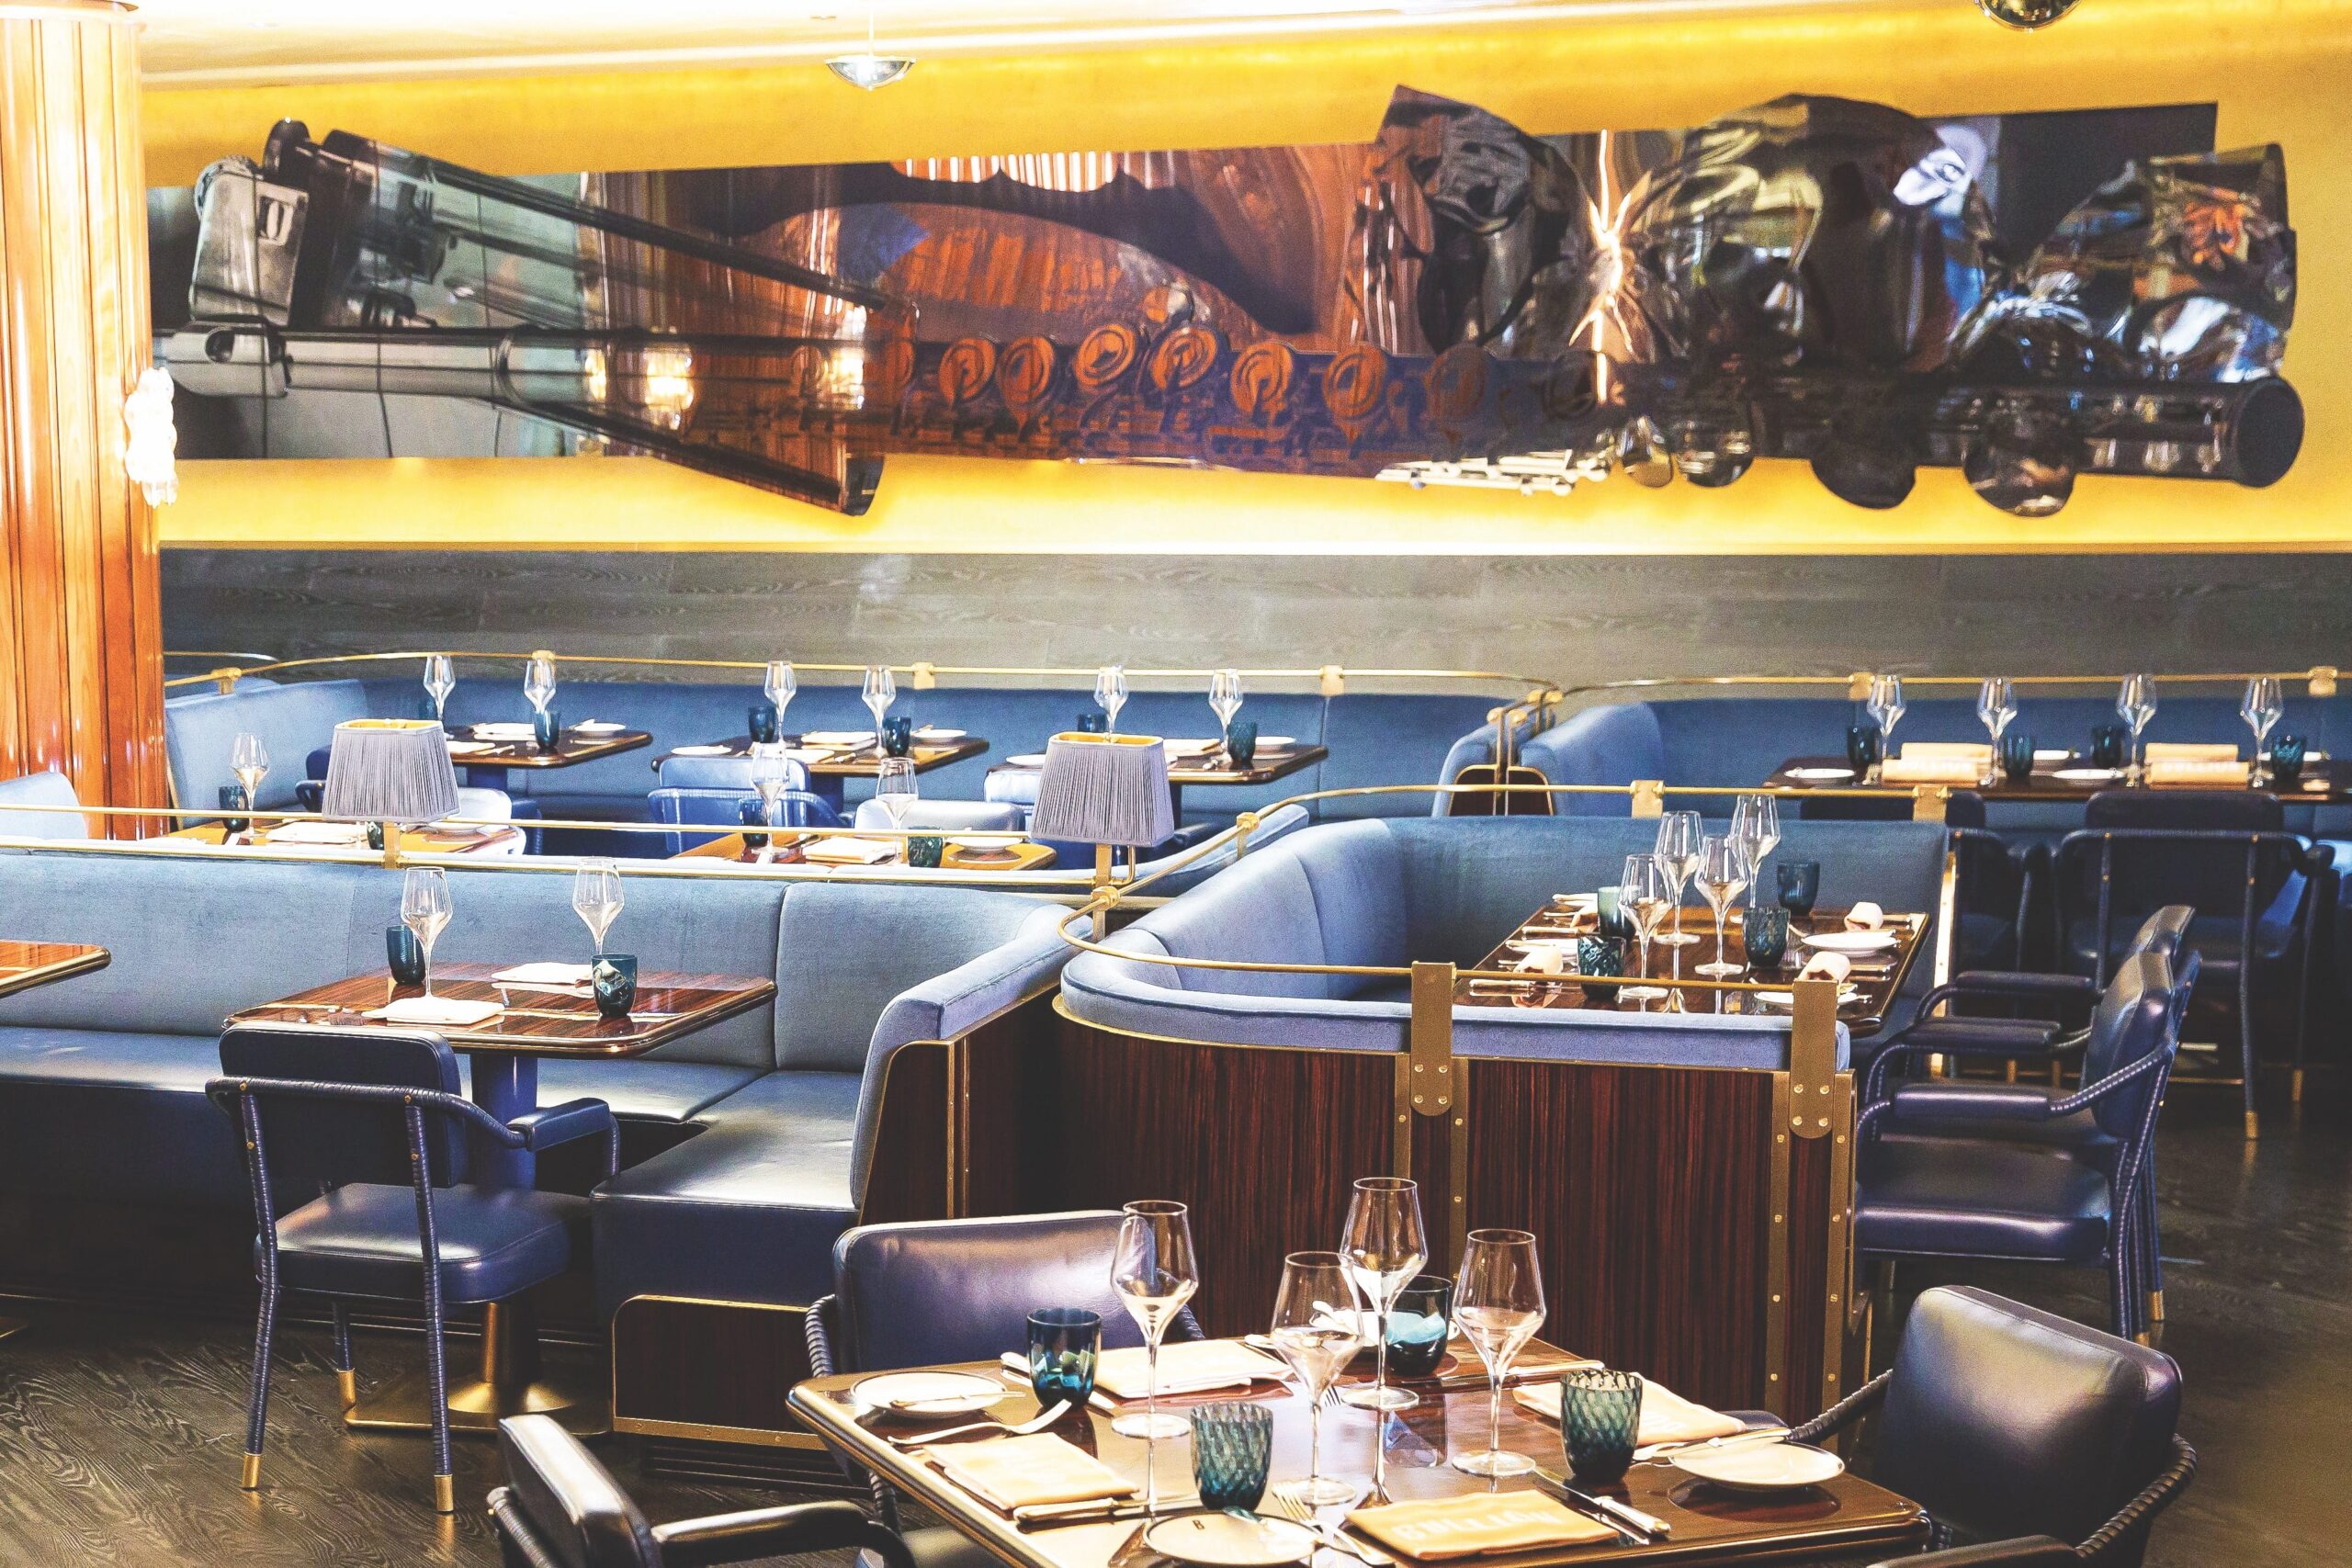 Bullion restaurant has a beautiful interior with large wall art and plush blue, seats.